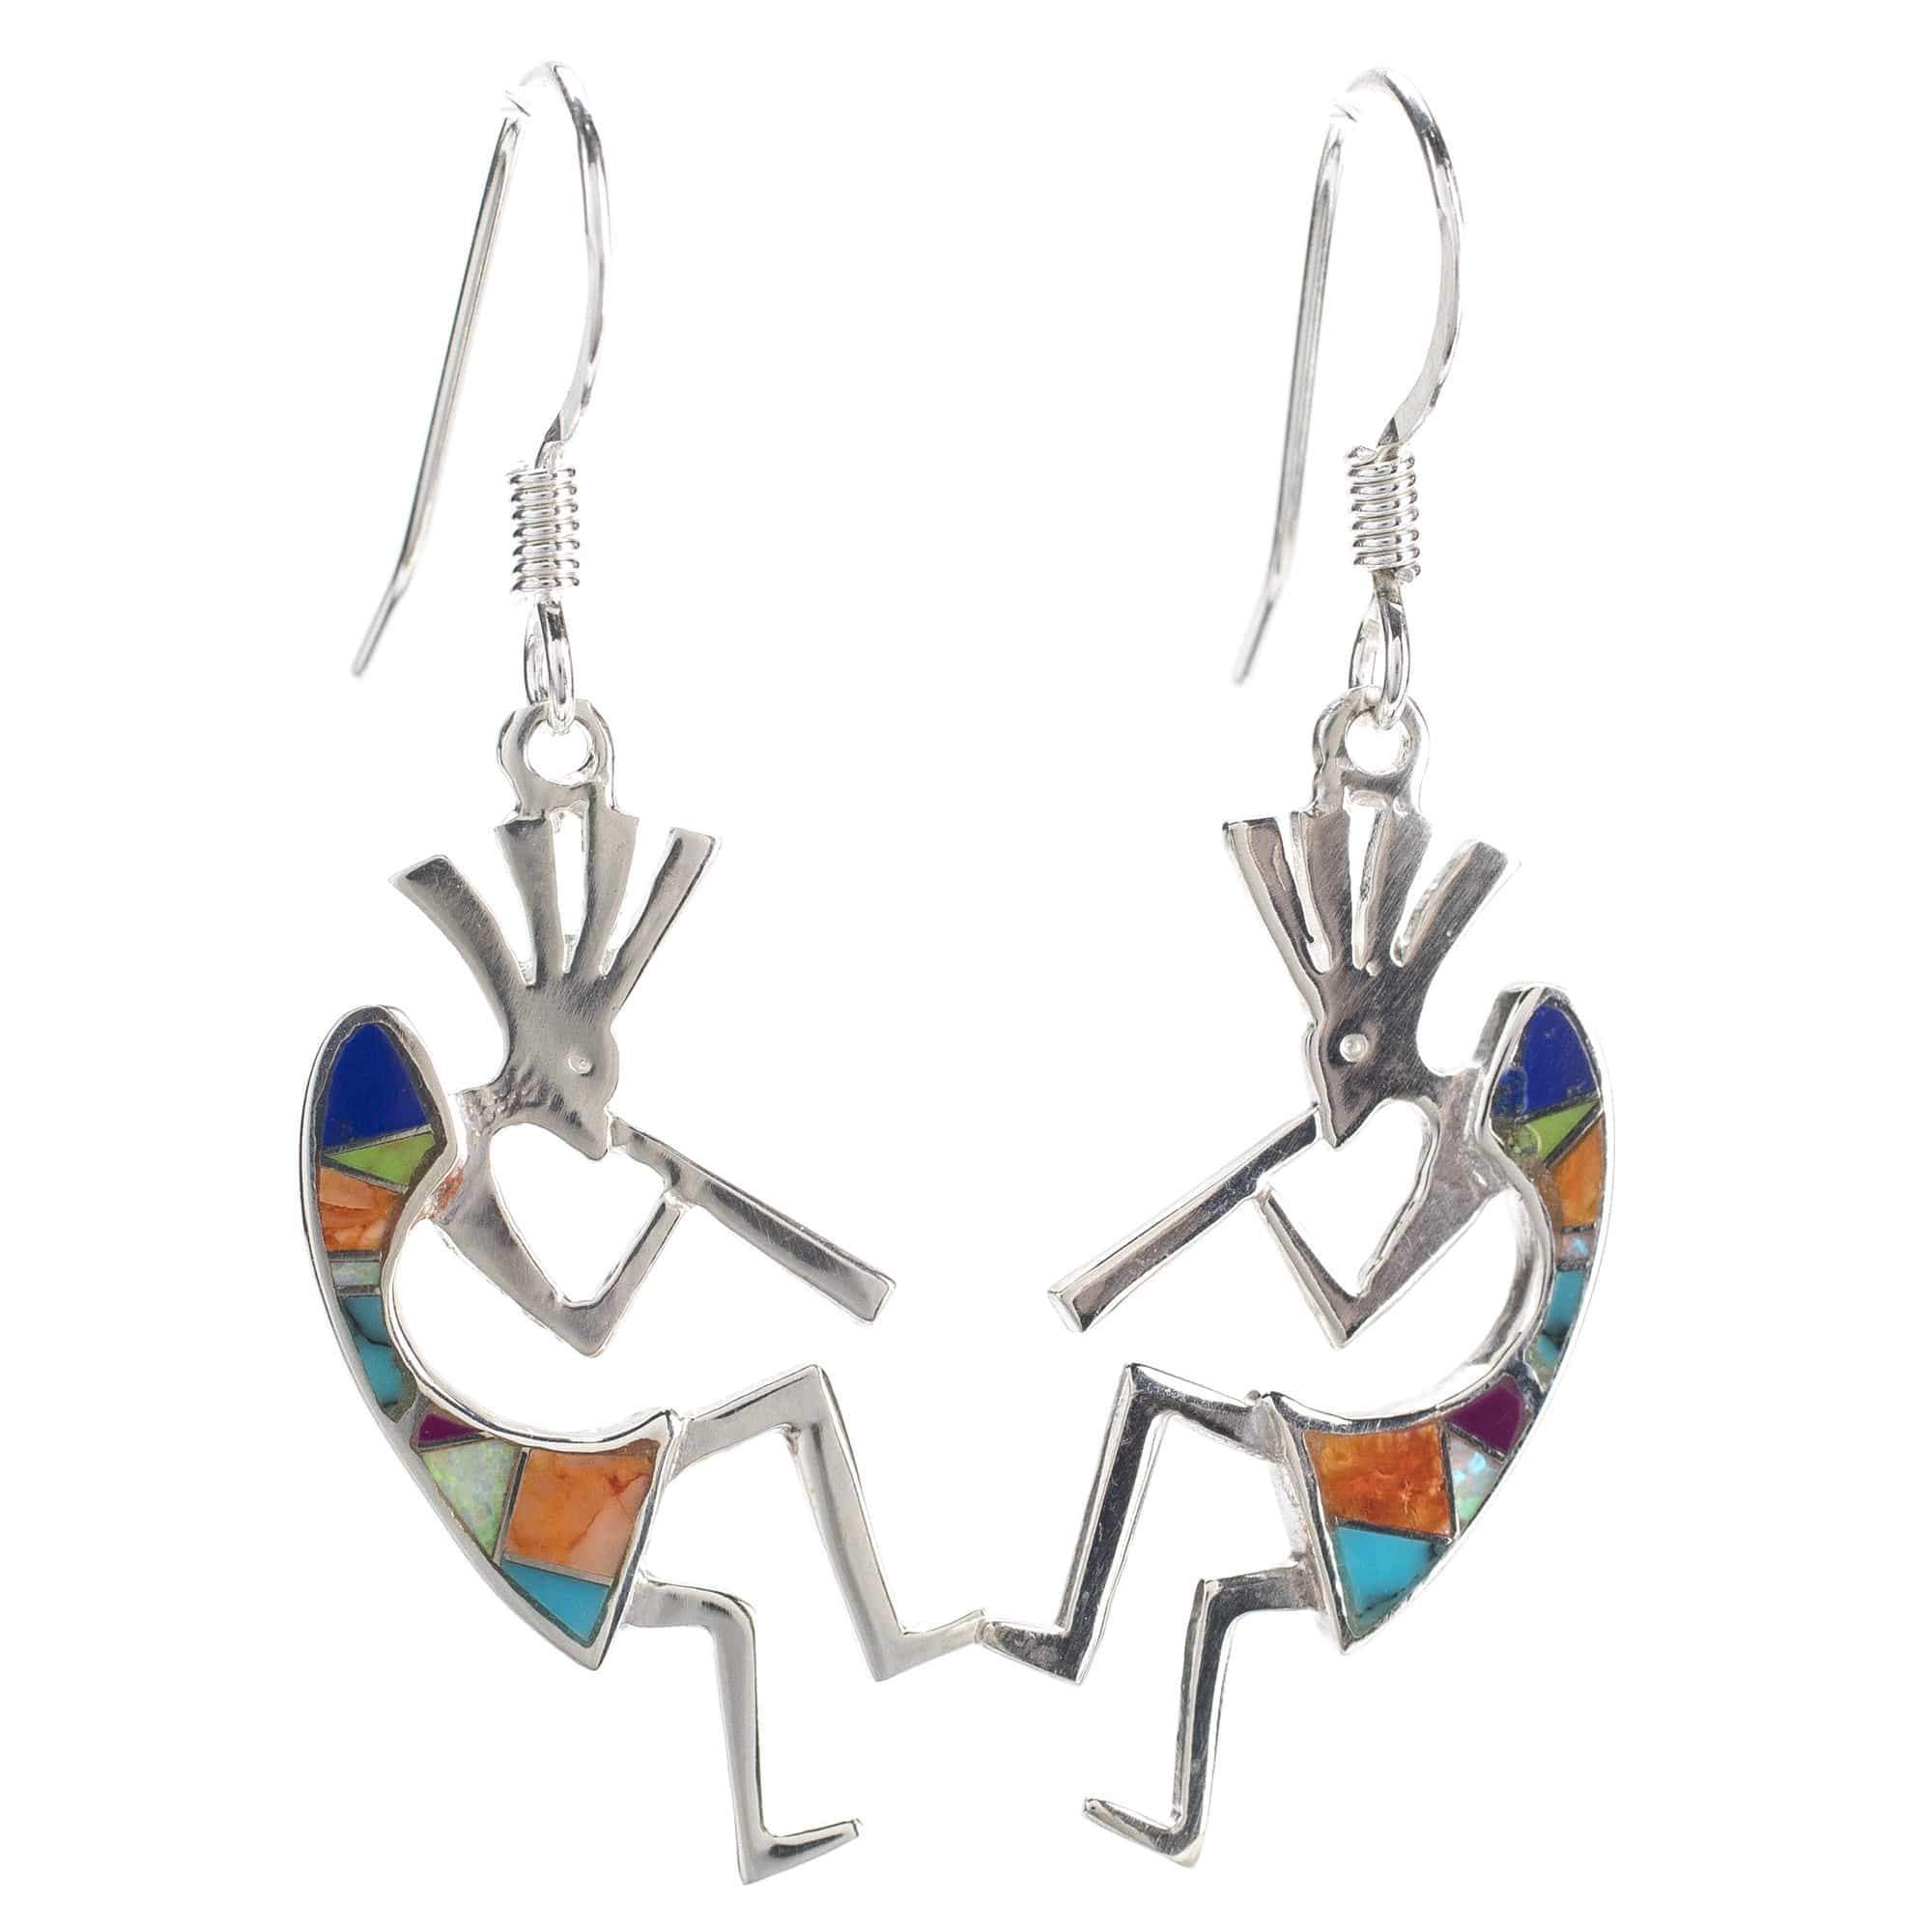 Kalifano Southwest Silver Jewelry Multi Gemstone Kokopelli 925 Sterling Silver Earring with French Hook USA Handmade with Aqua Opal Accent NME.2155.MT